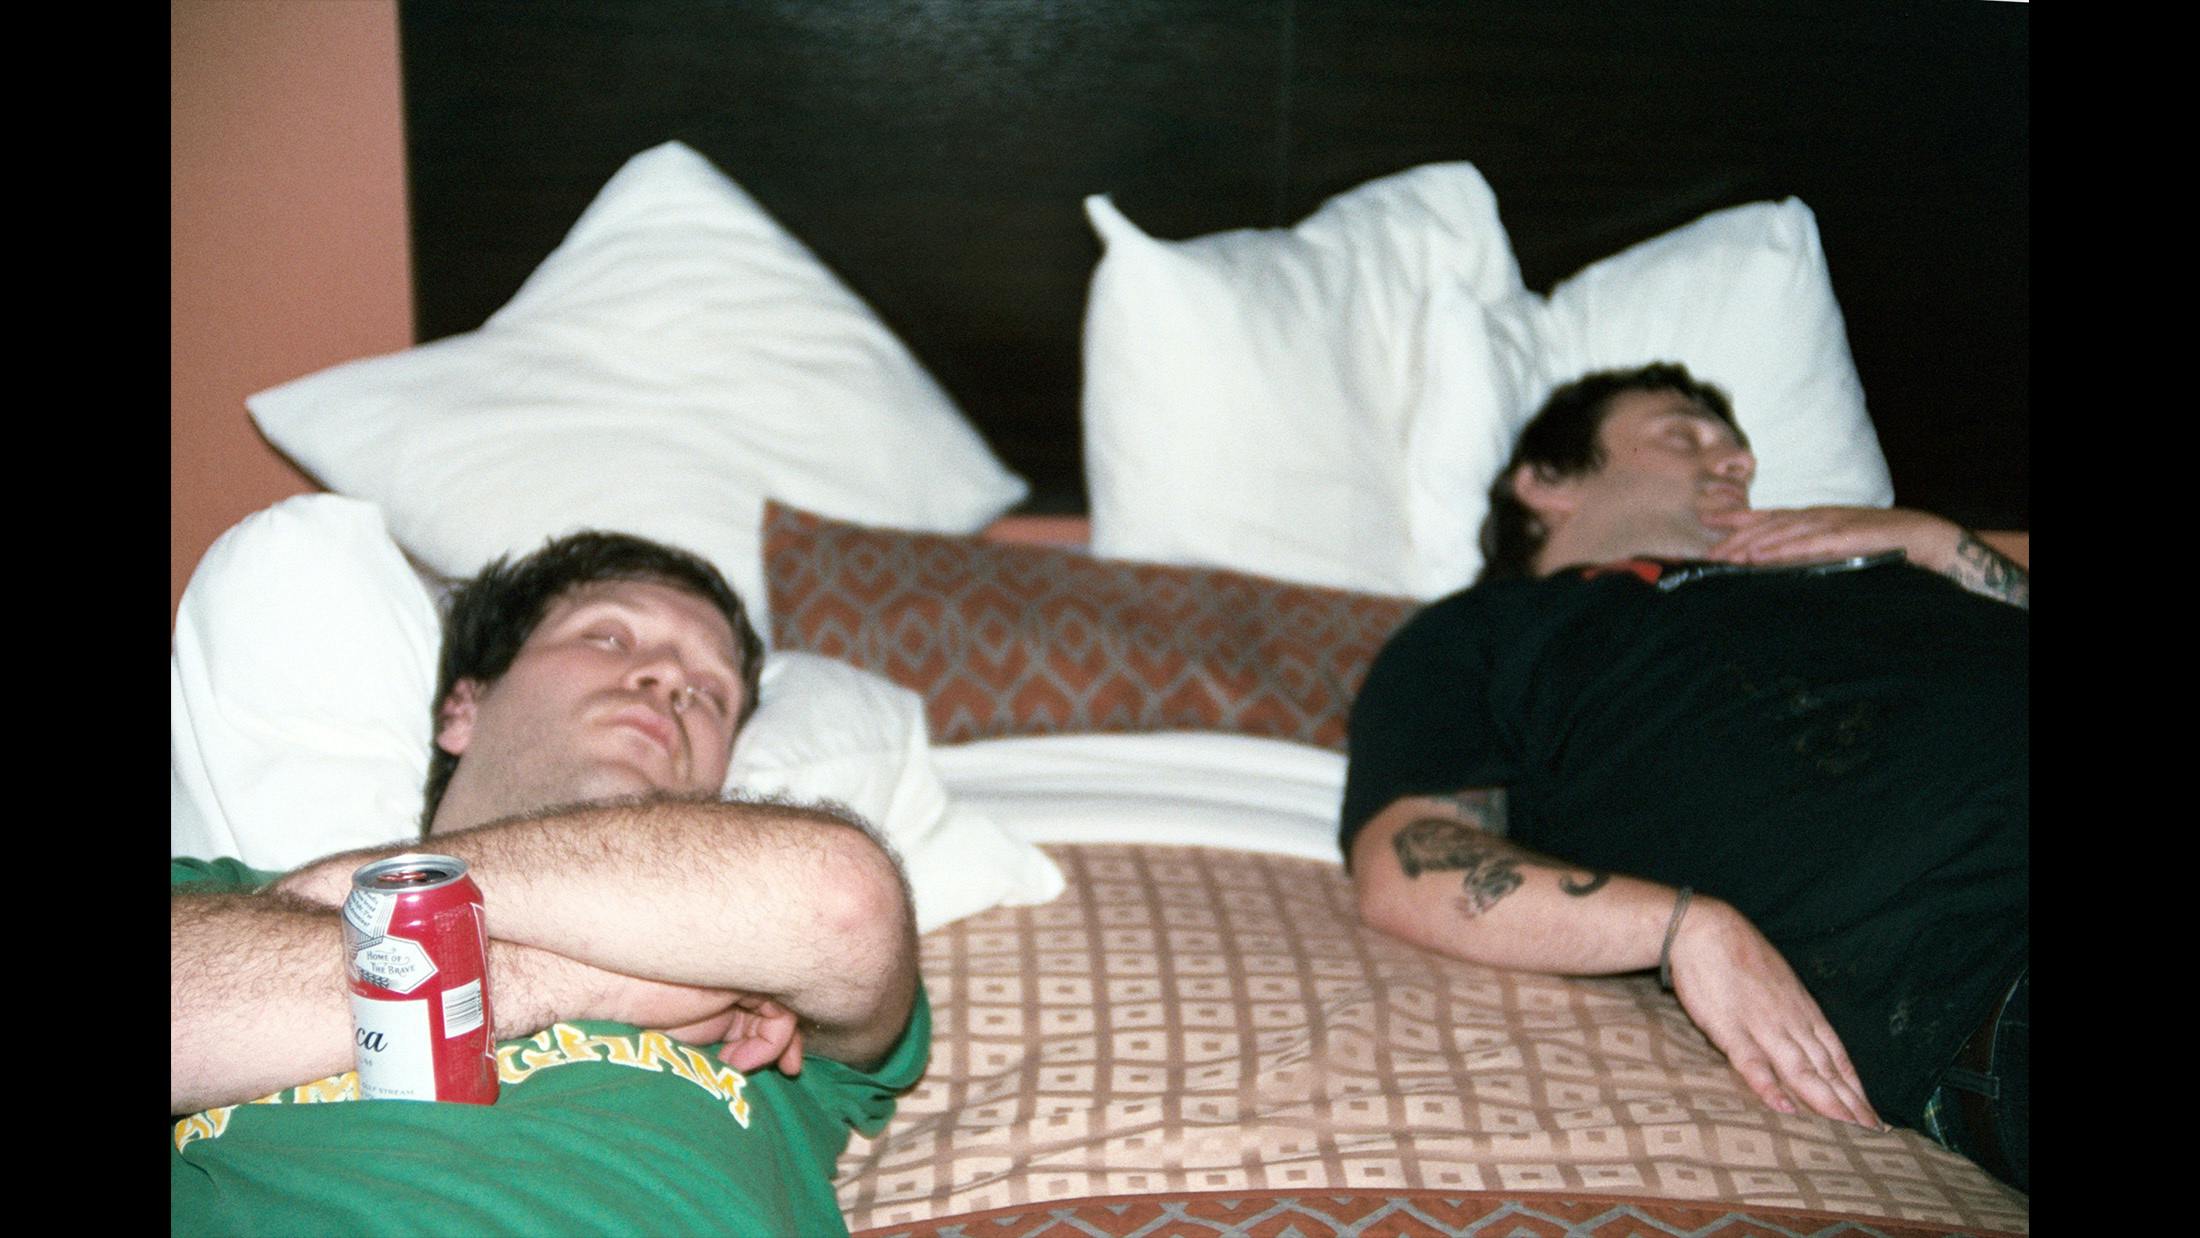 Two passed out fools in Arkansas after a show with too many drinks.